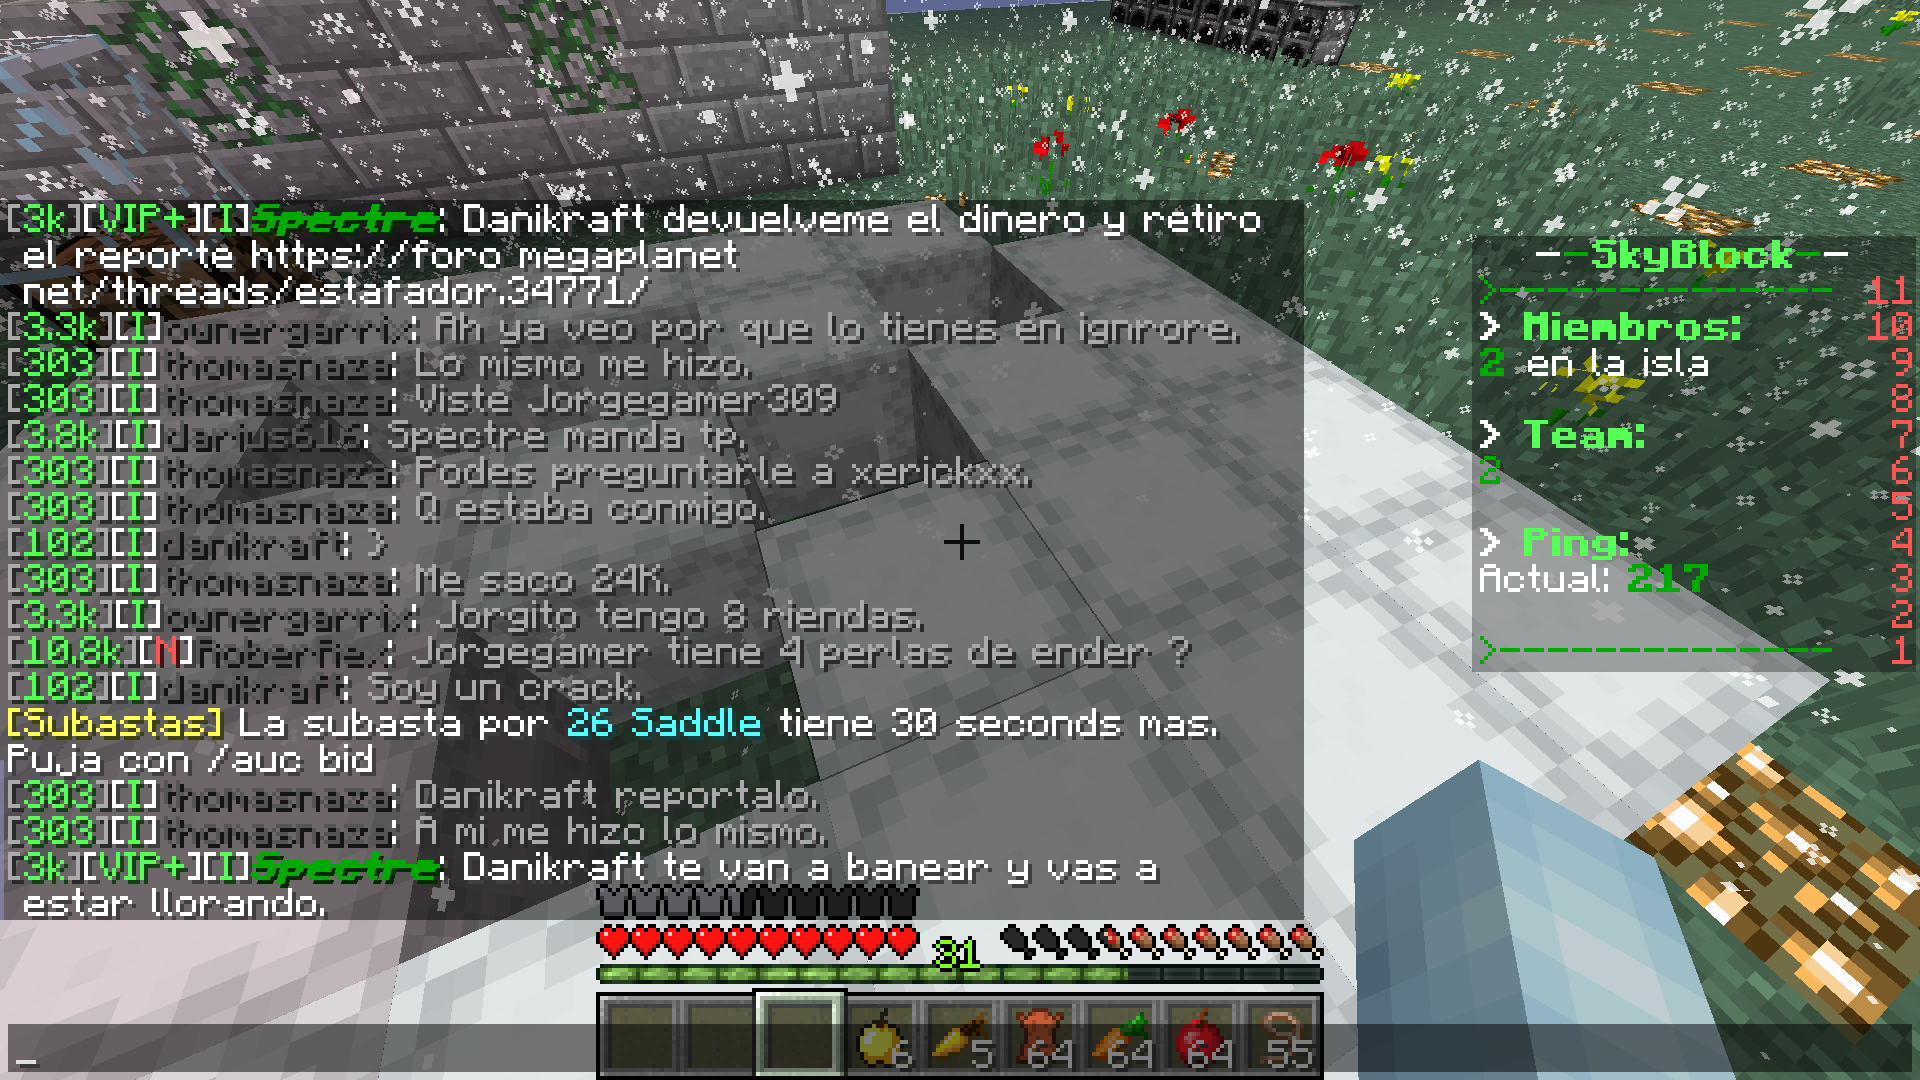 reporte actual.png x3.png